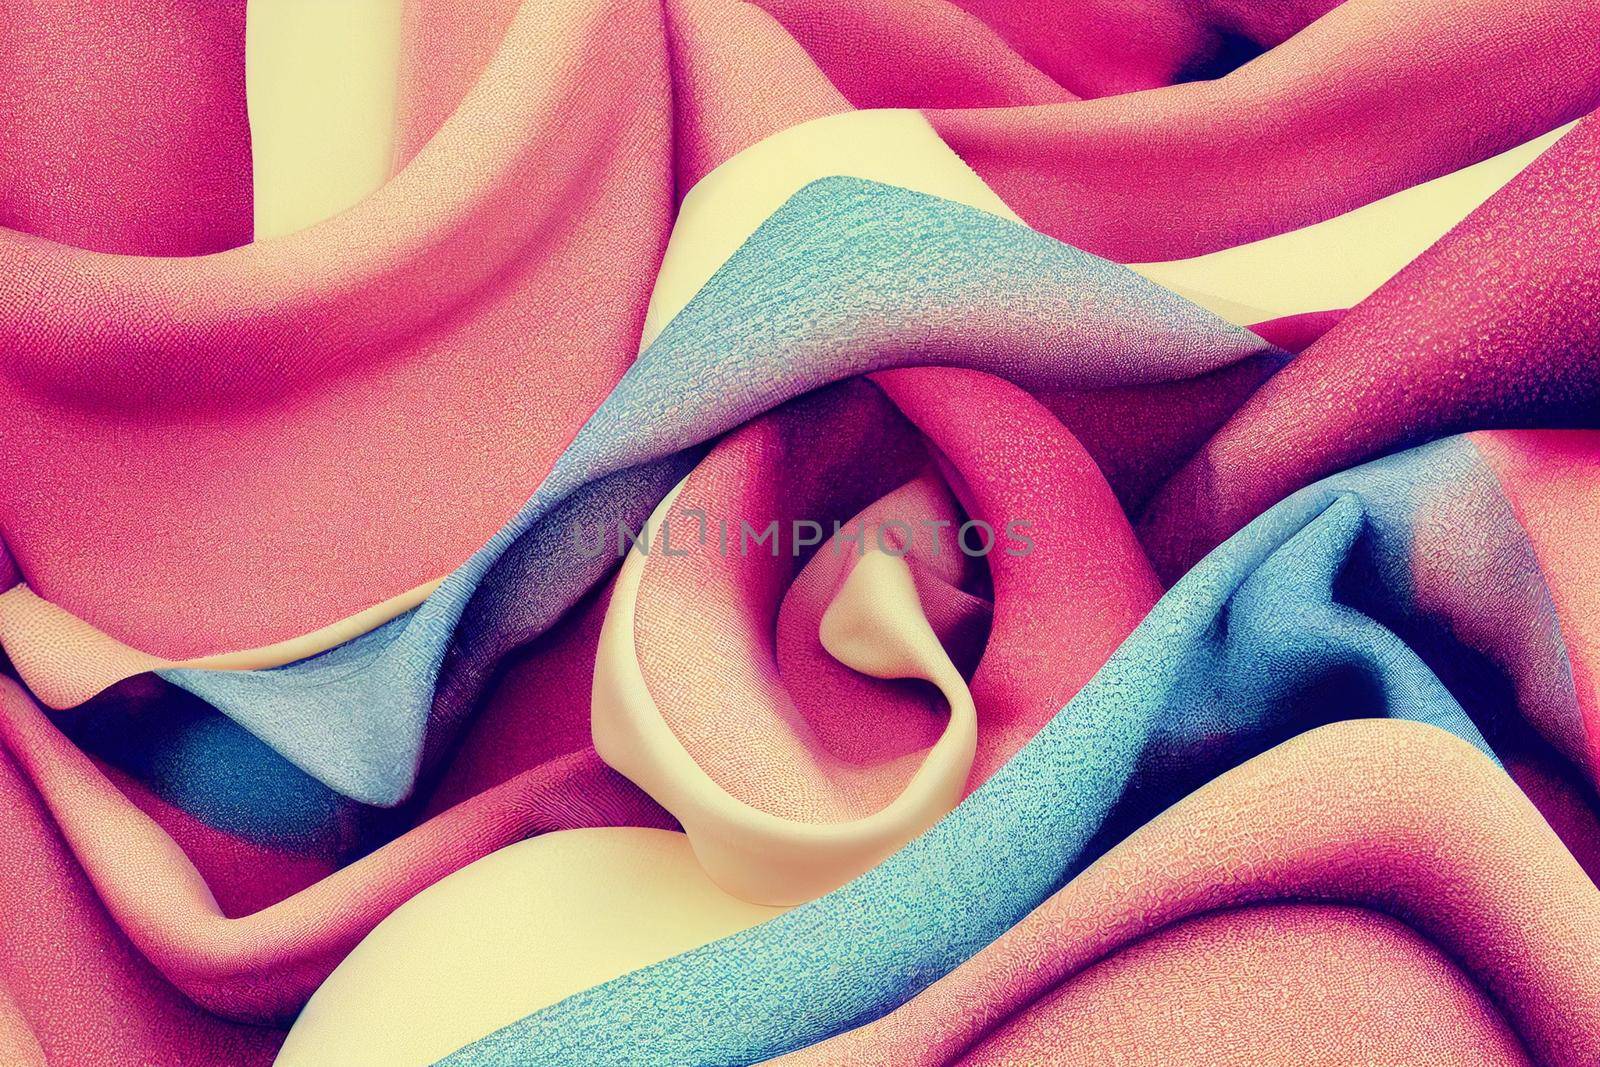 3D render of undulating fabric creamy colors with complex texture. Silk fabric beige organza macro texture abstract background.